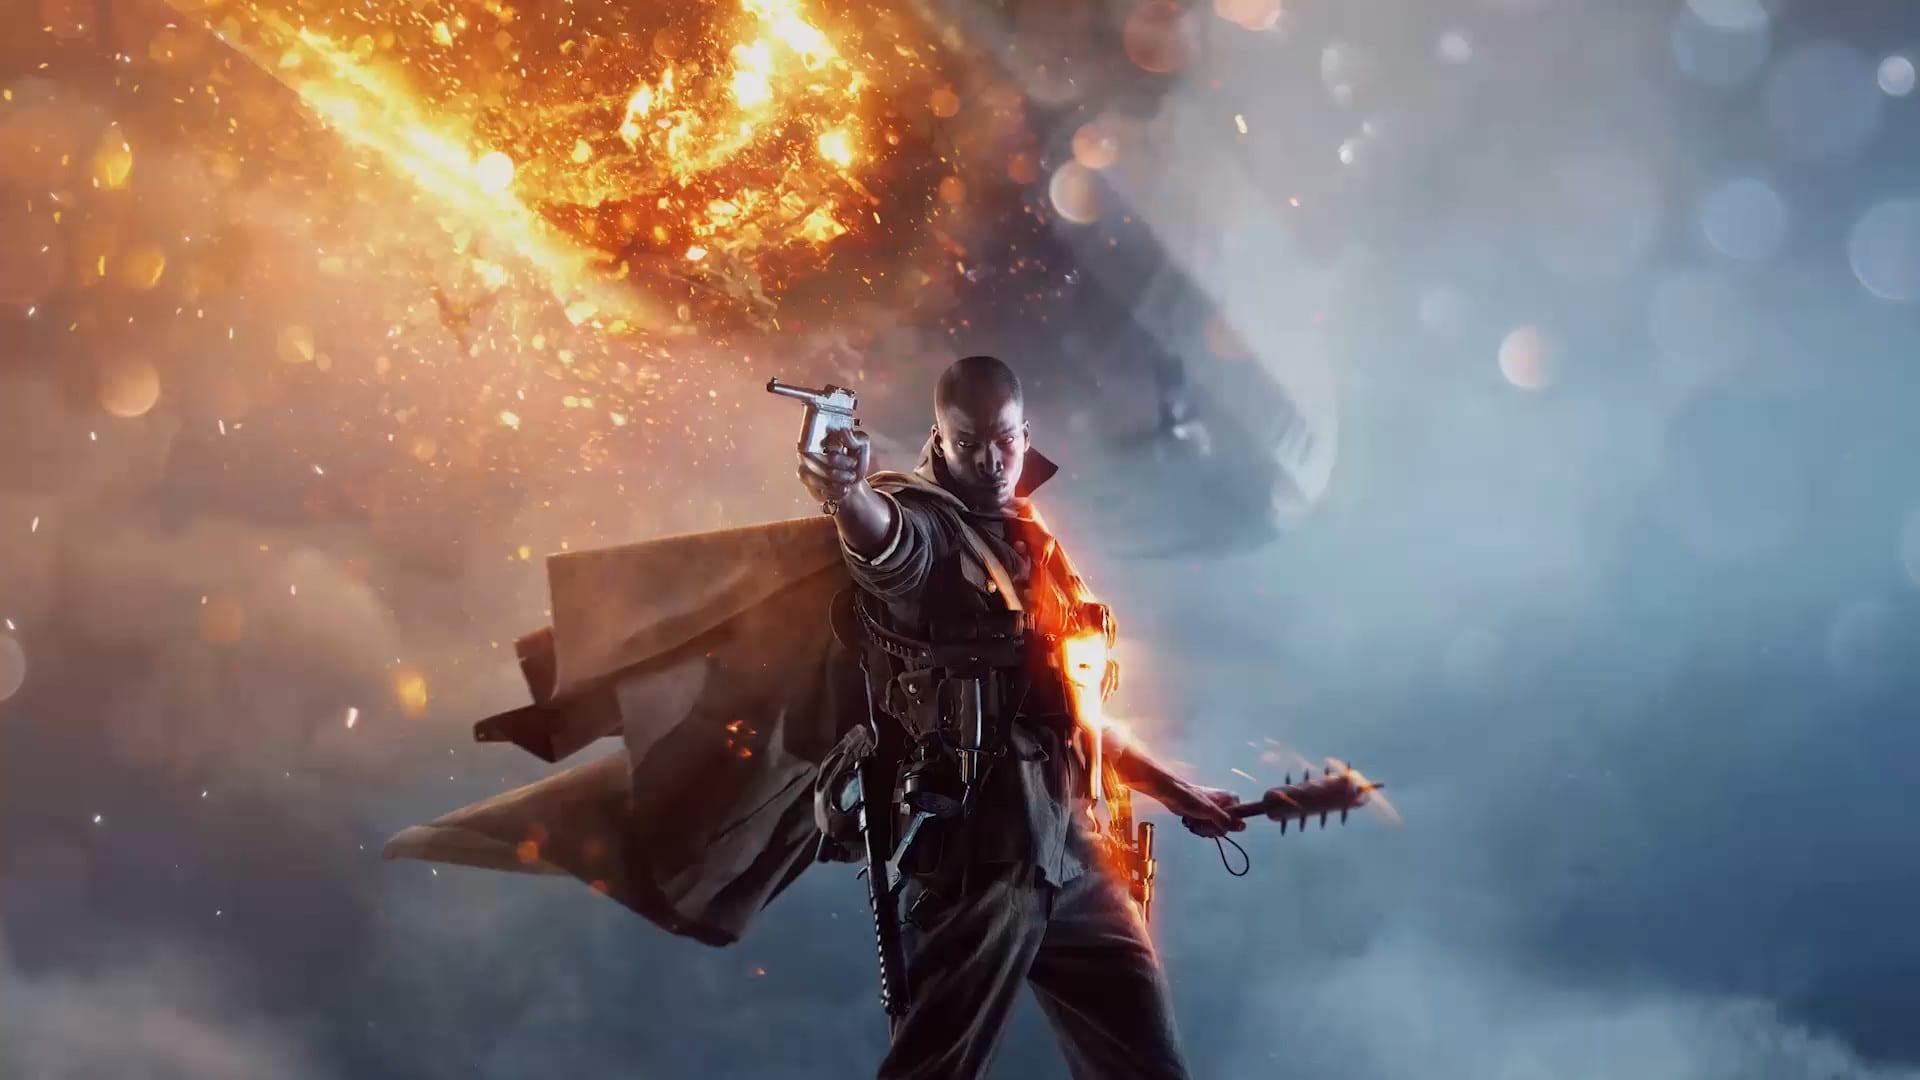 Battlefield 1 Update Version 1.19 Brings the Apocalypse With New DLC, Full Patch Notes Inside